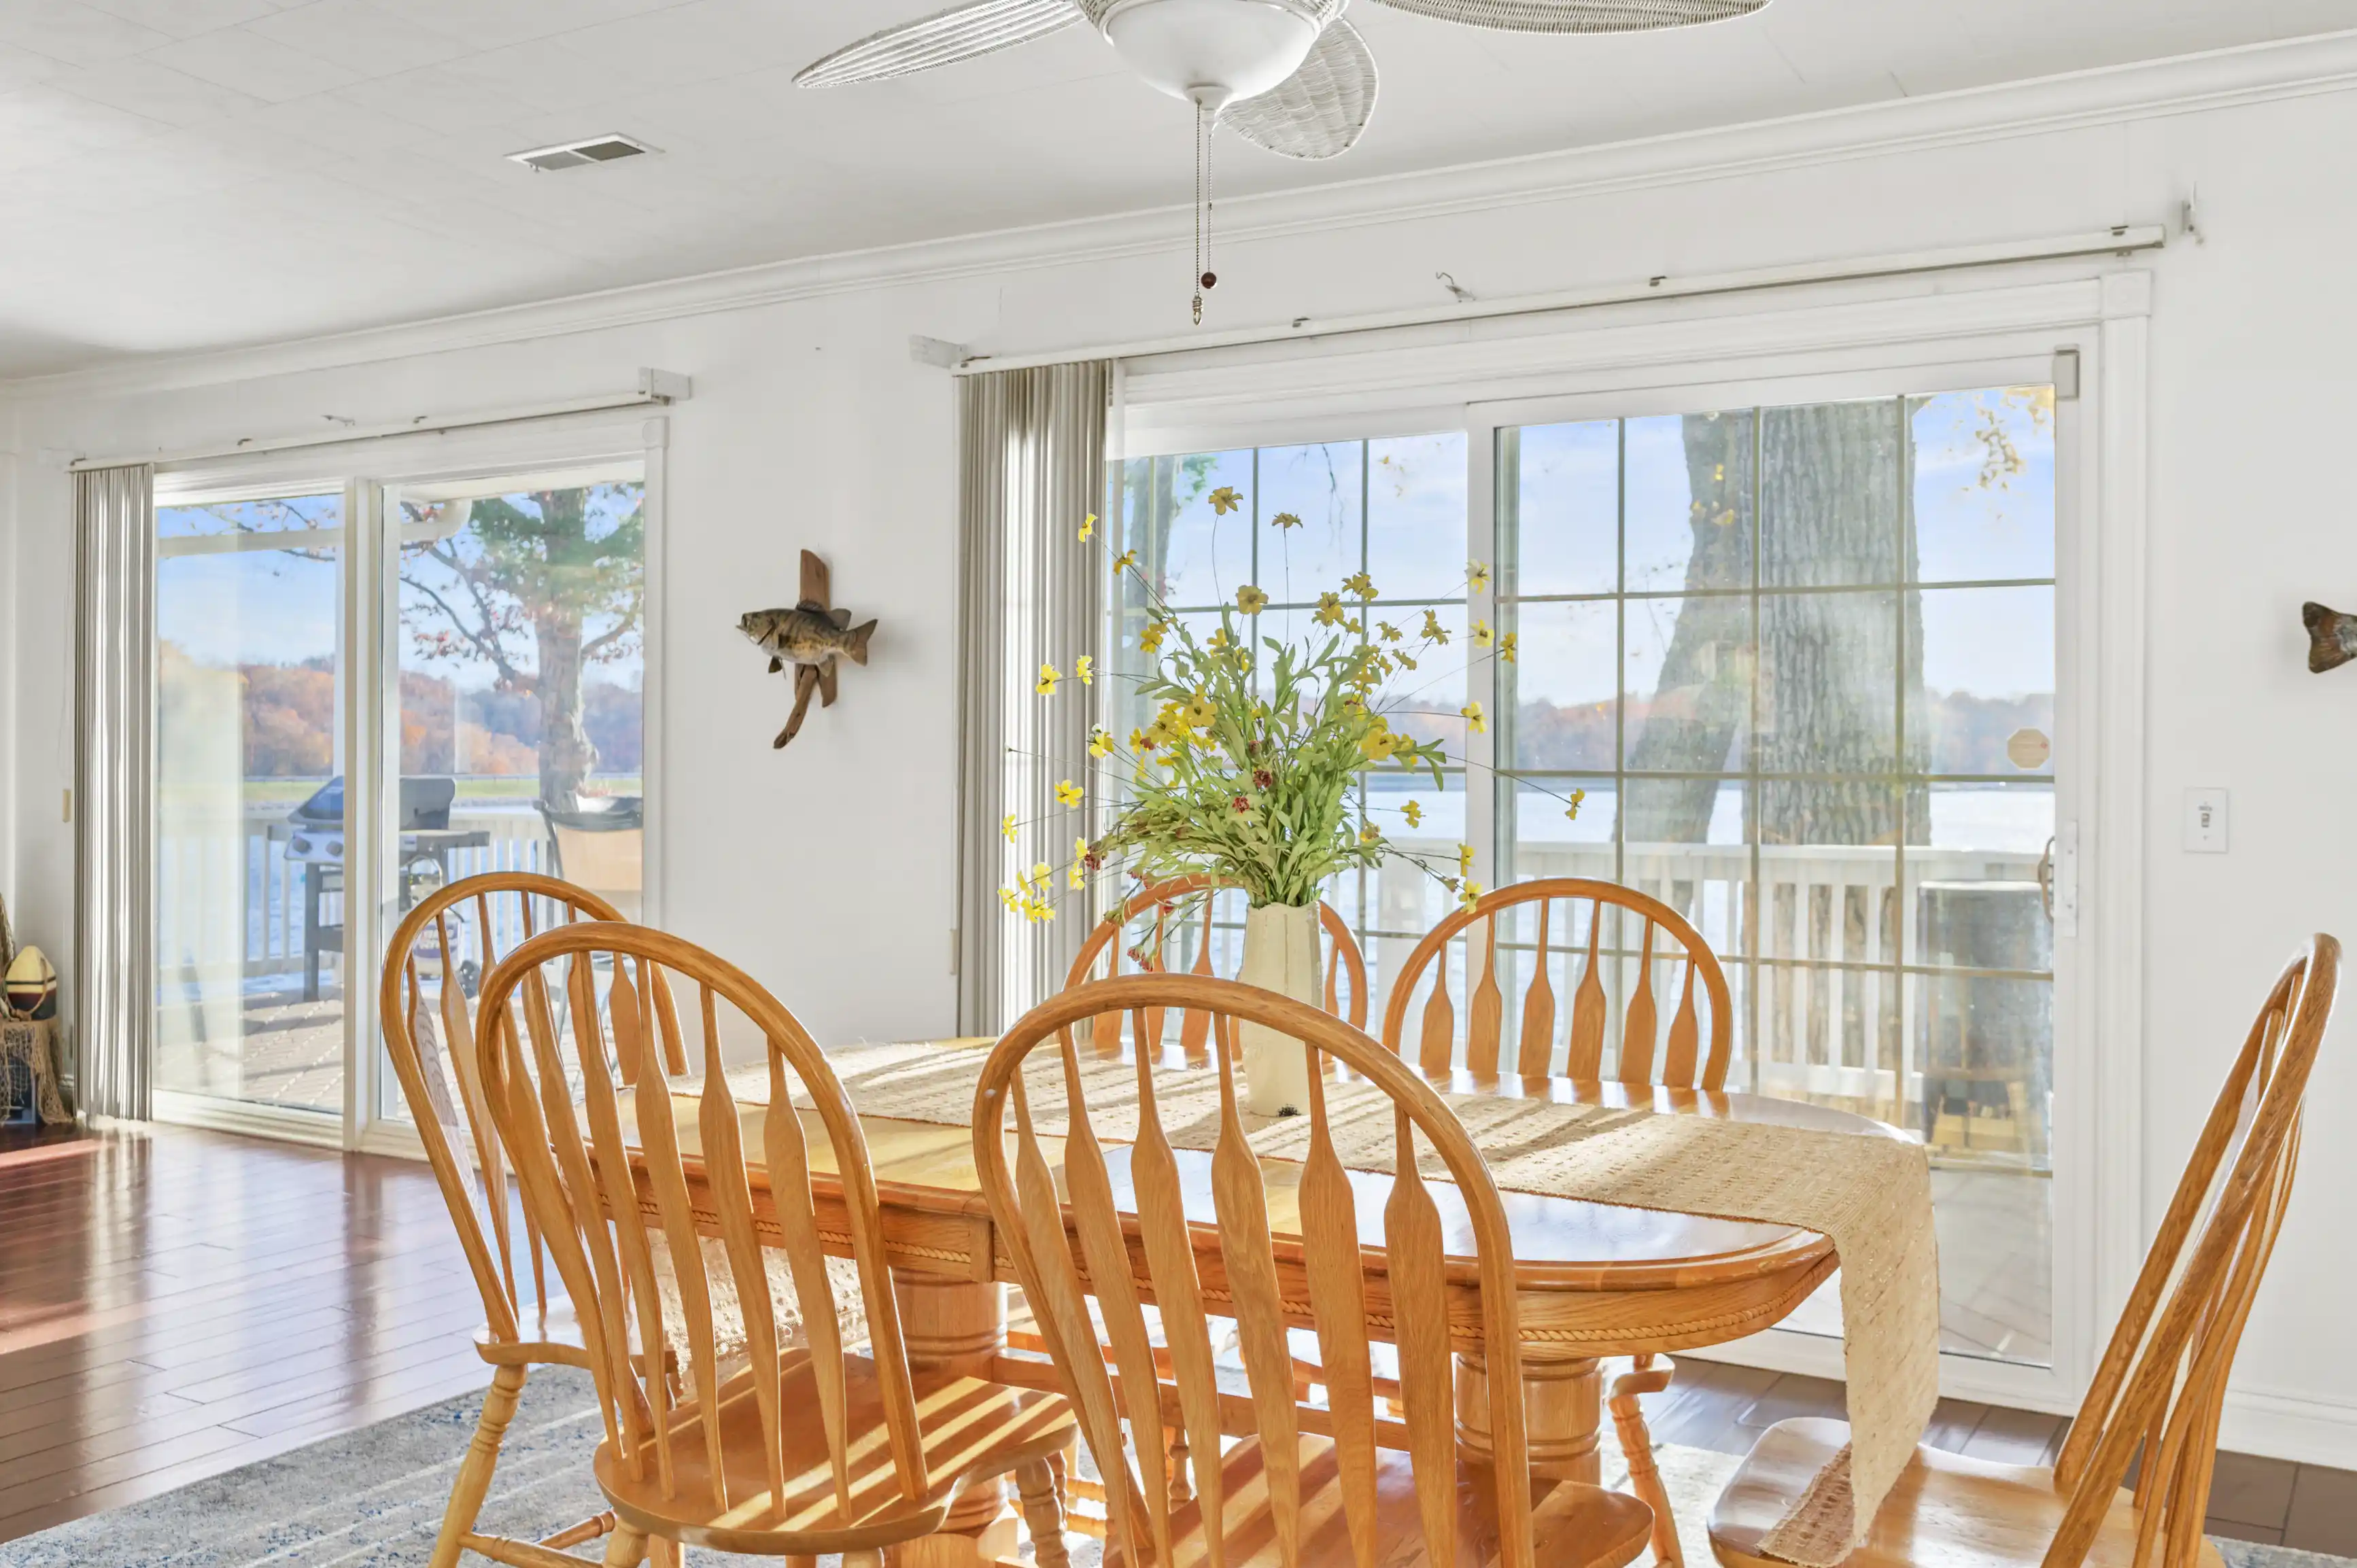 Bright and airy dining room with wooden furniture, a flower centerpiece, and lake view through sliding glass doors.